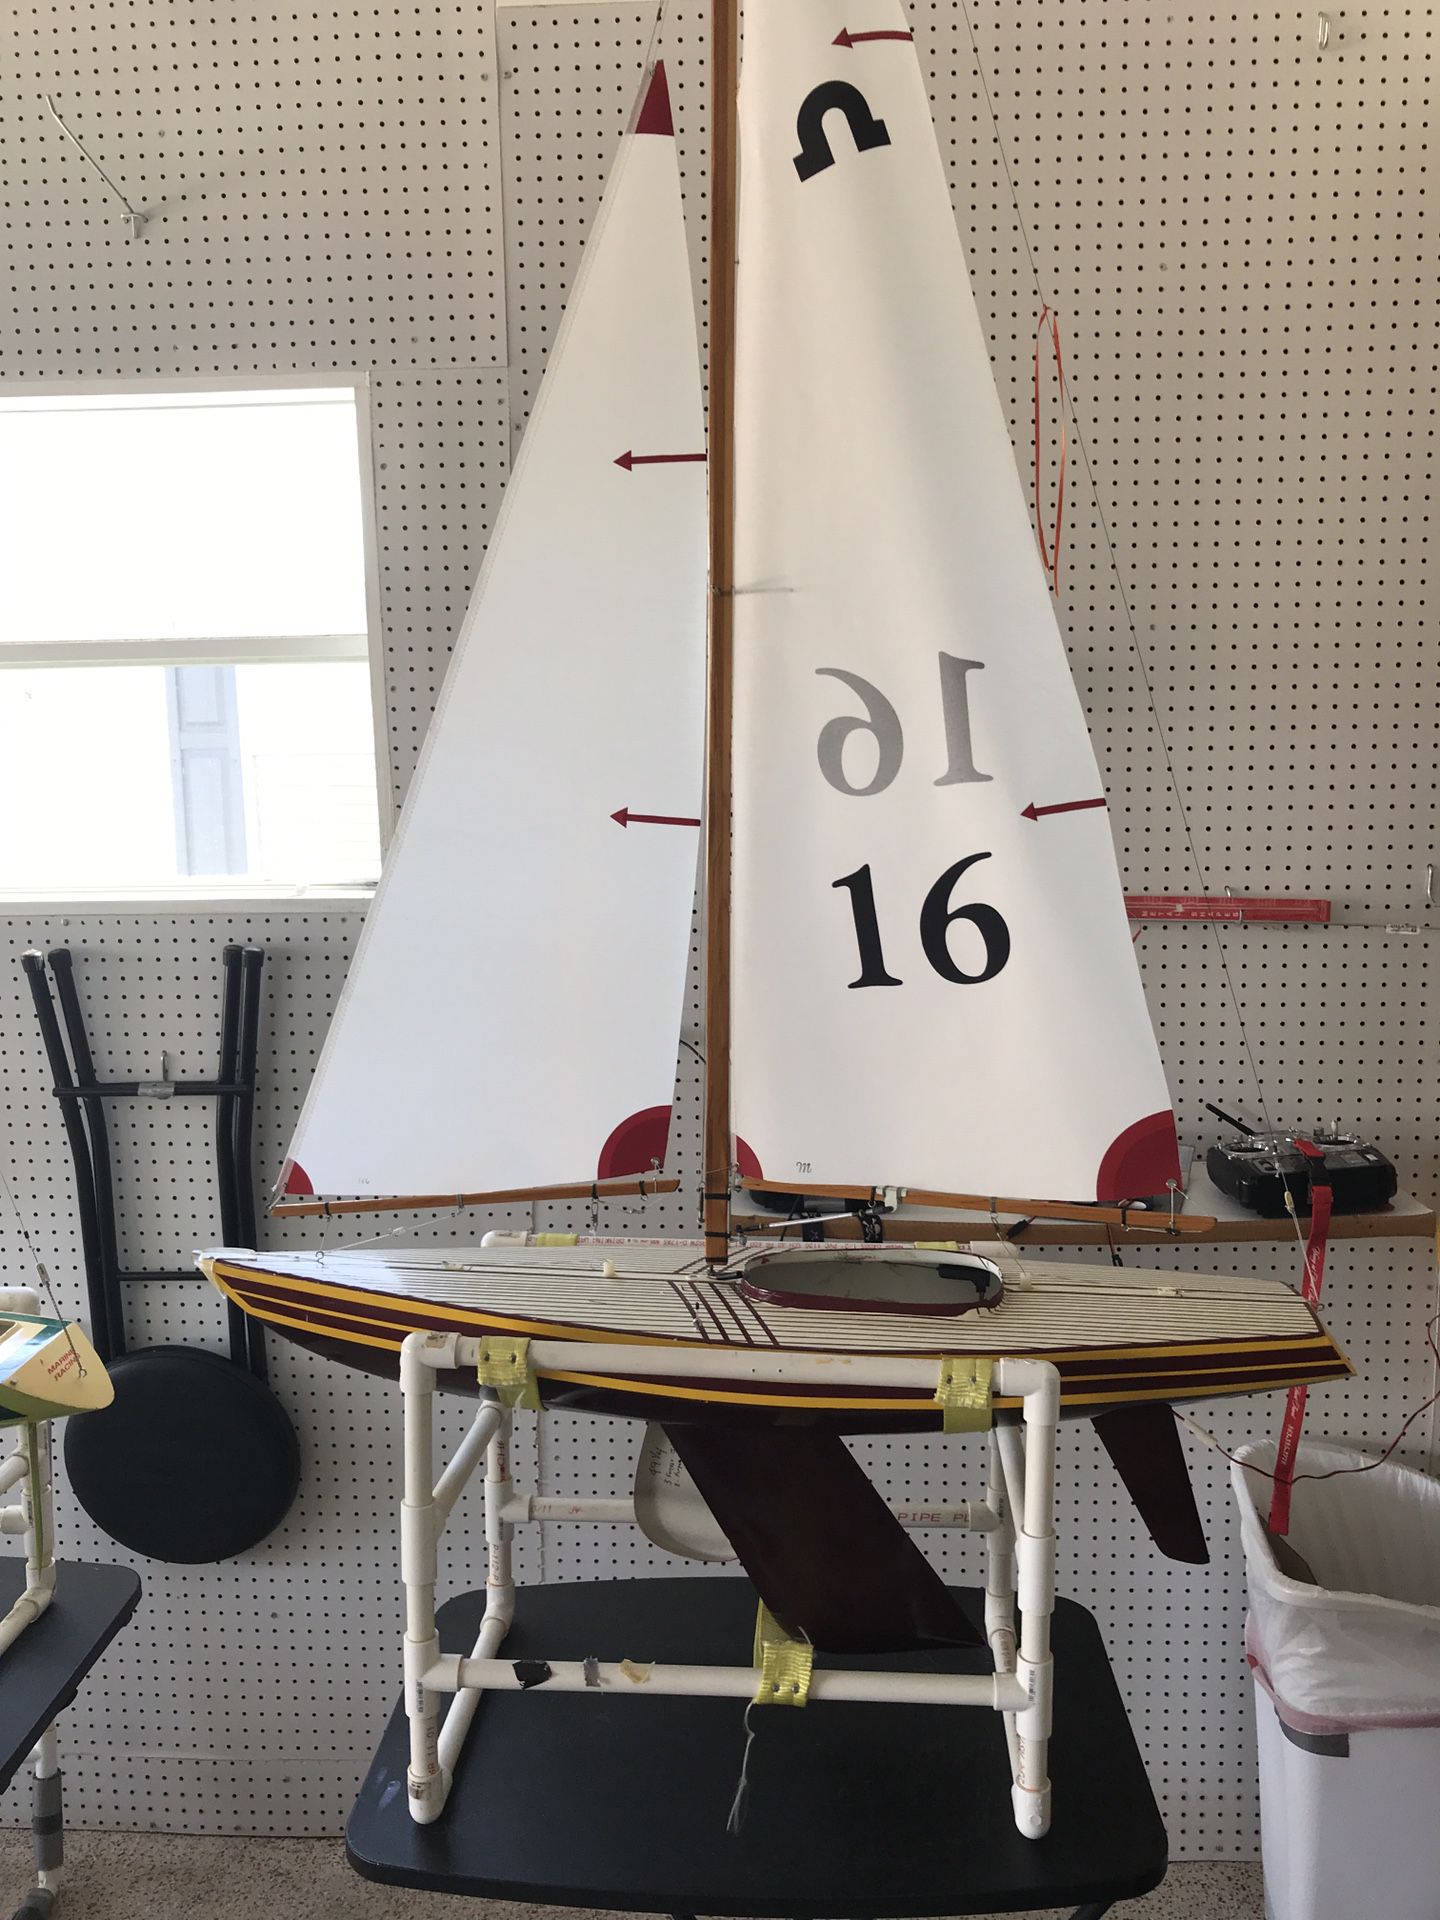 Sailboats (One Soling and one Fairwind )with remotes